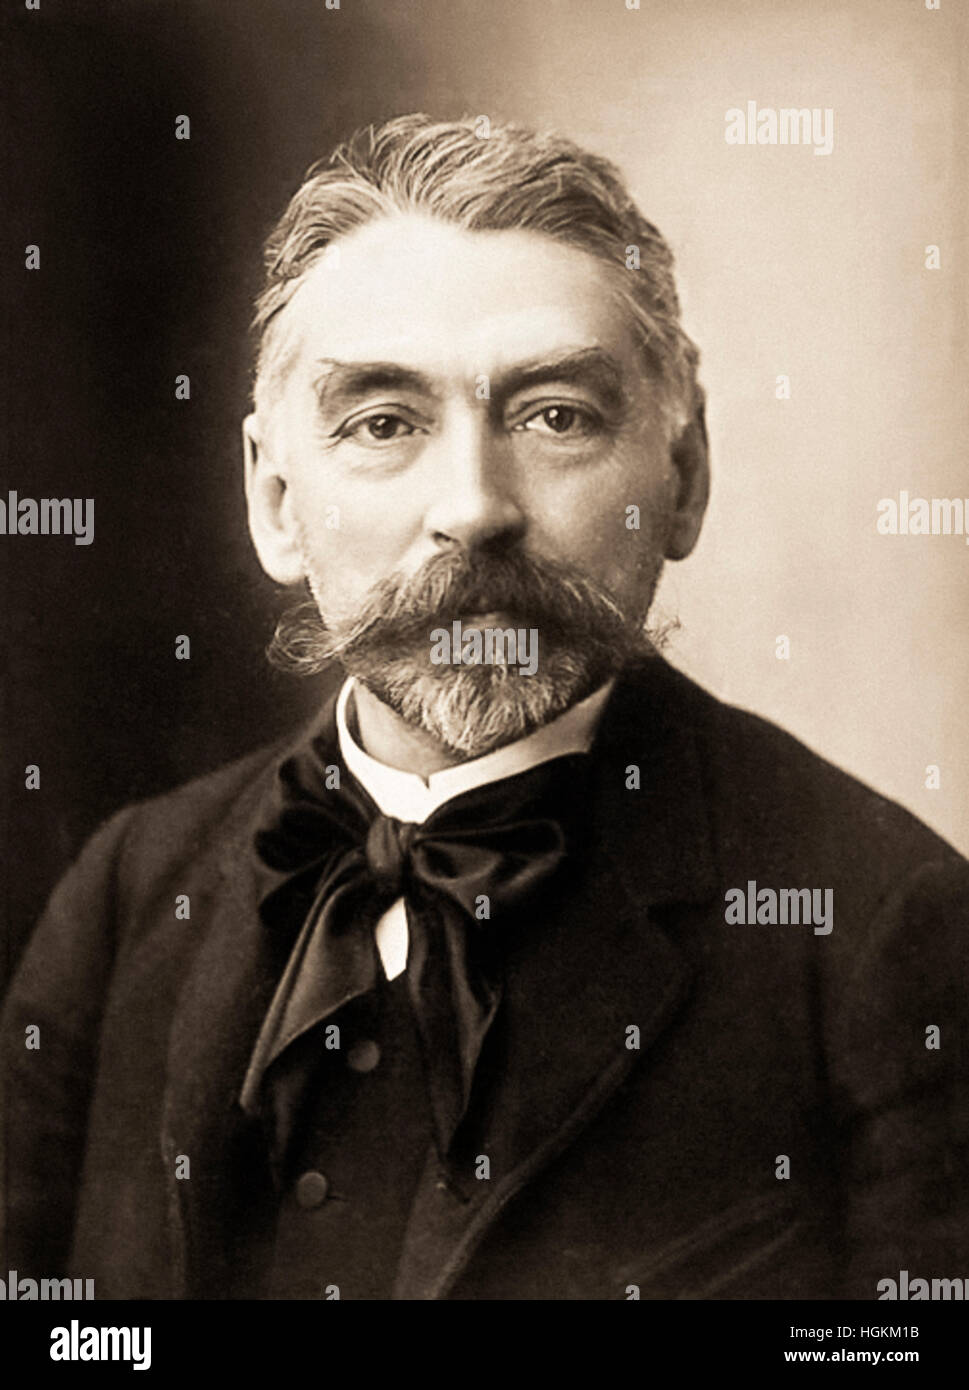 Stephane Mallarme (1842-1898) innovative French poet who’s poems and salons influenced and provided inspiration for many early 20th century avant-garde art movements. See description for more information. Stock Photo